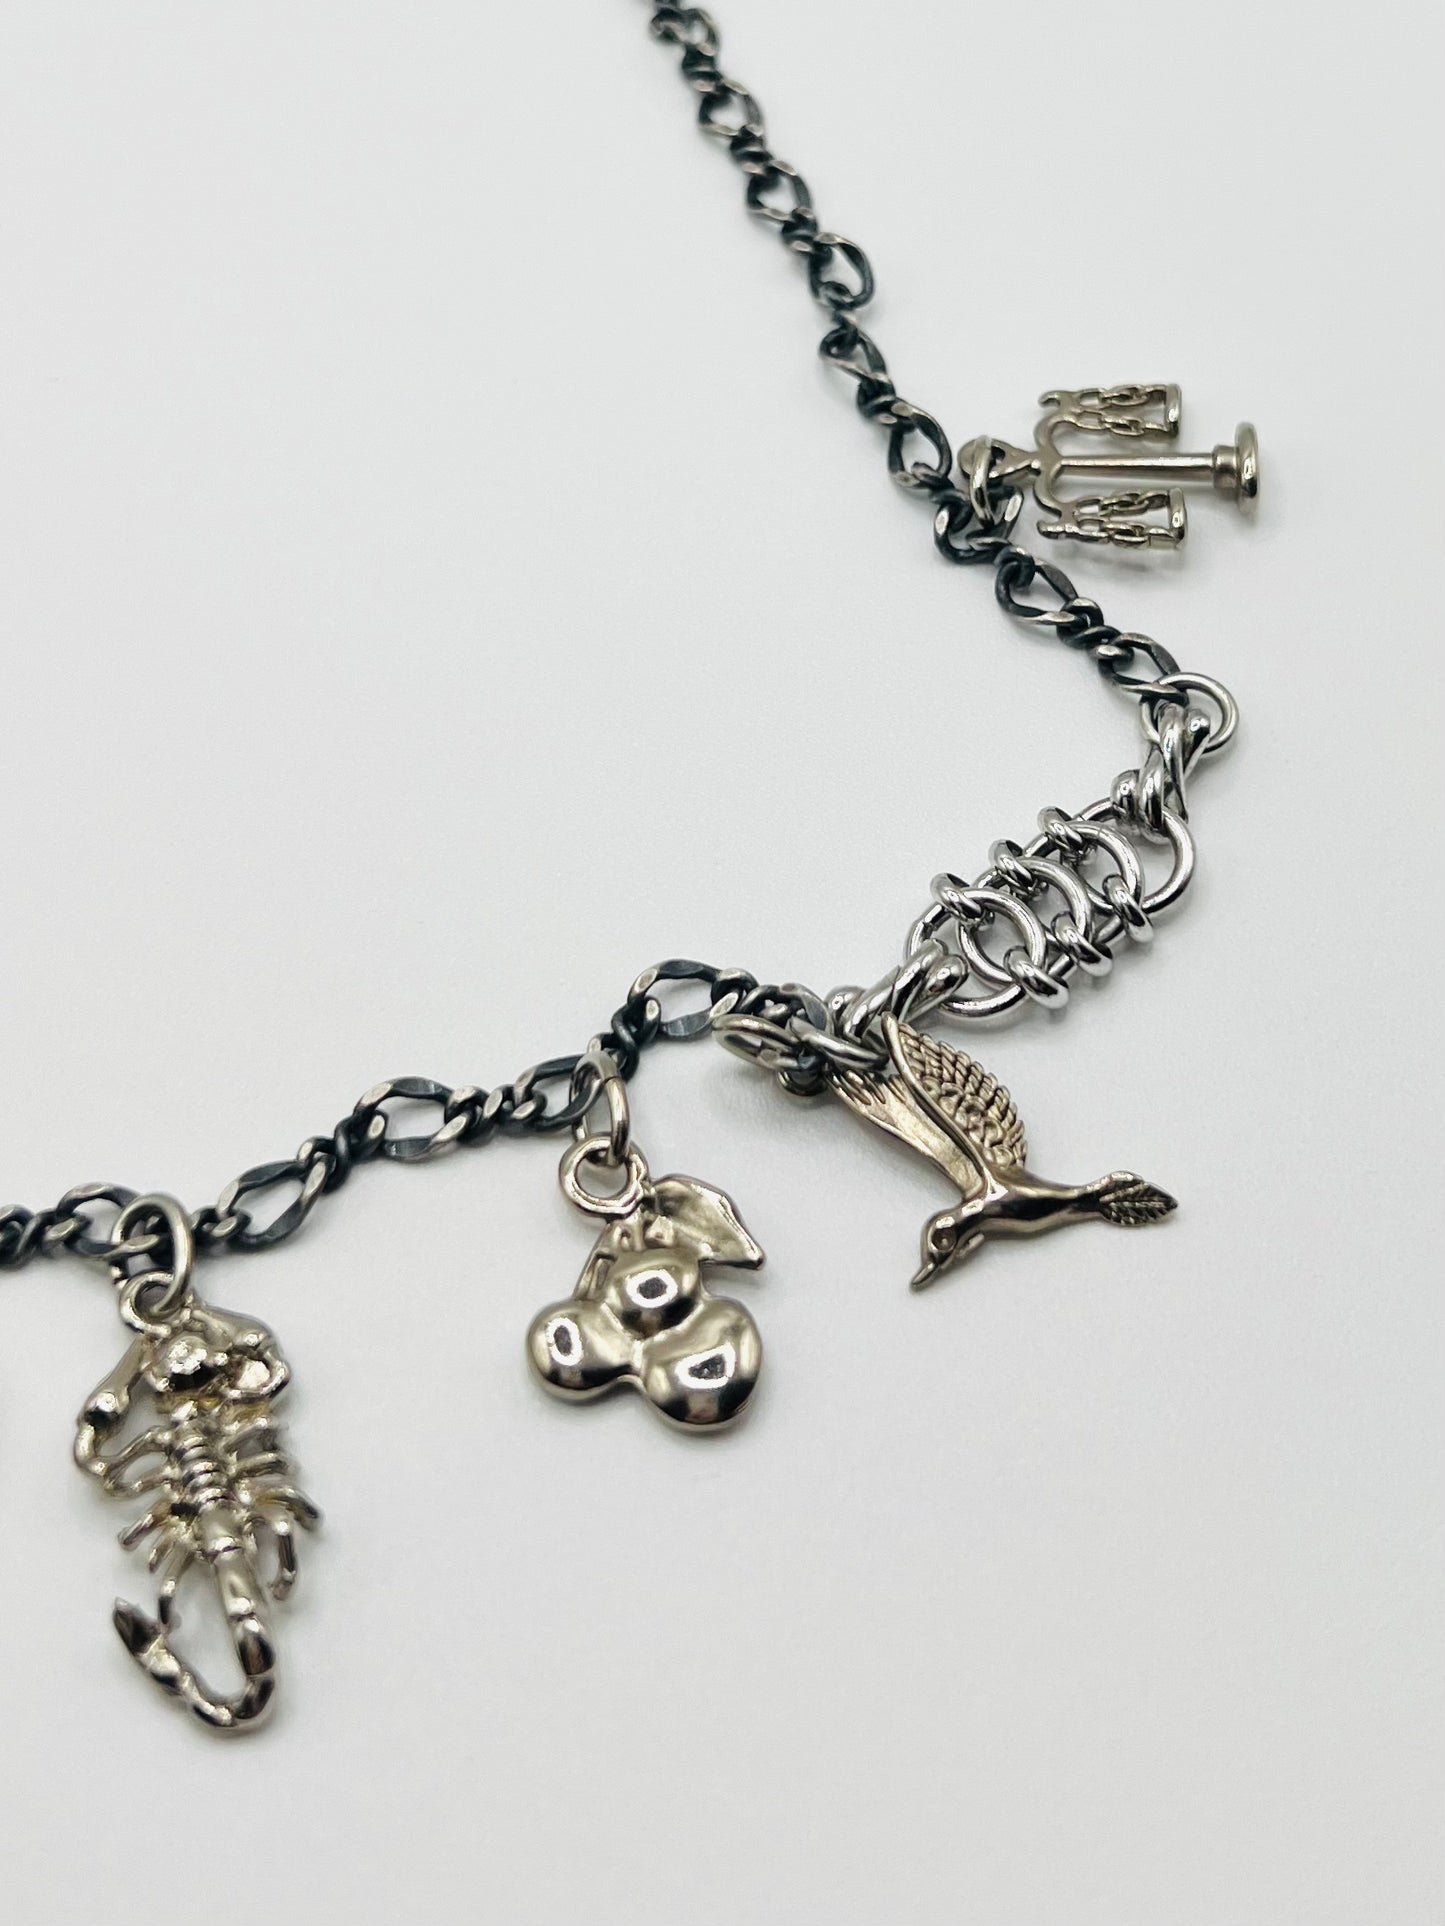 Chain charm necklace